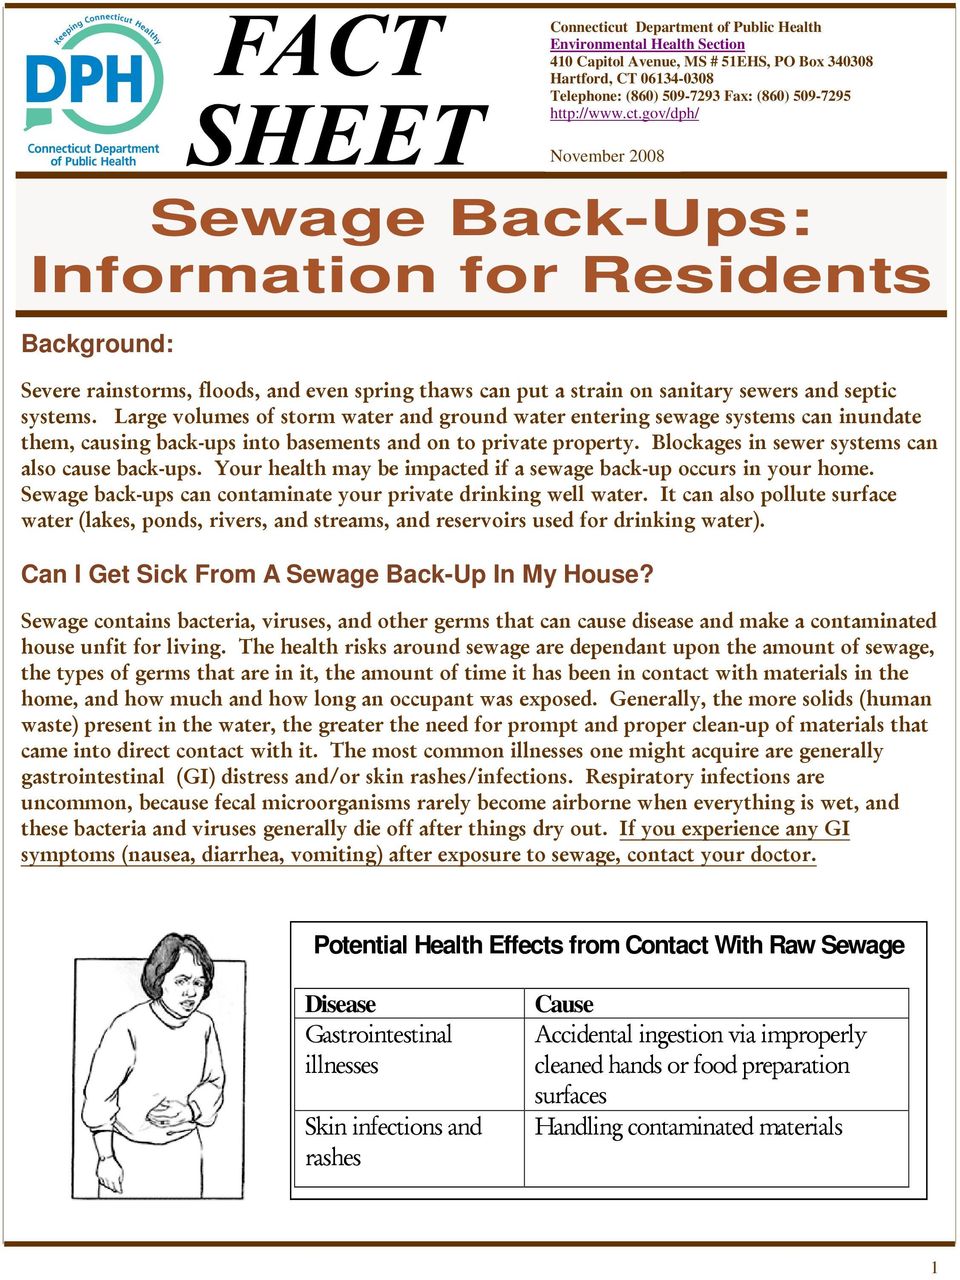 Your health may be impacted if a sewage back-up occurs in your home. Sewage back-ups can contaminate your private drinking well water.